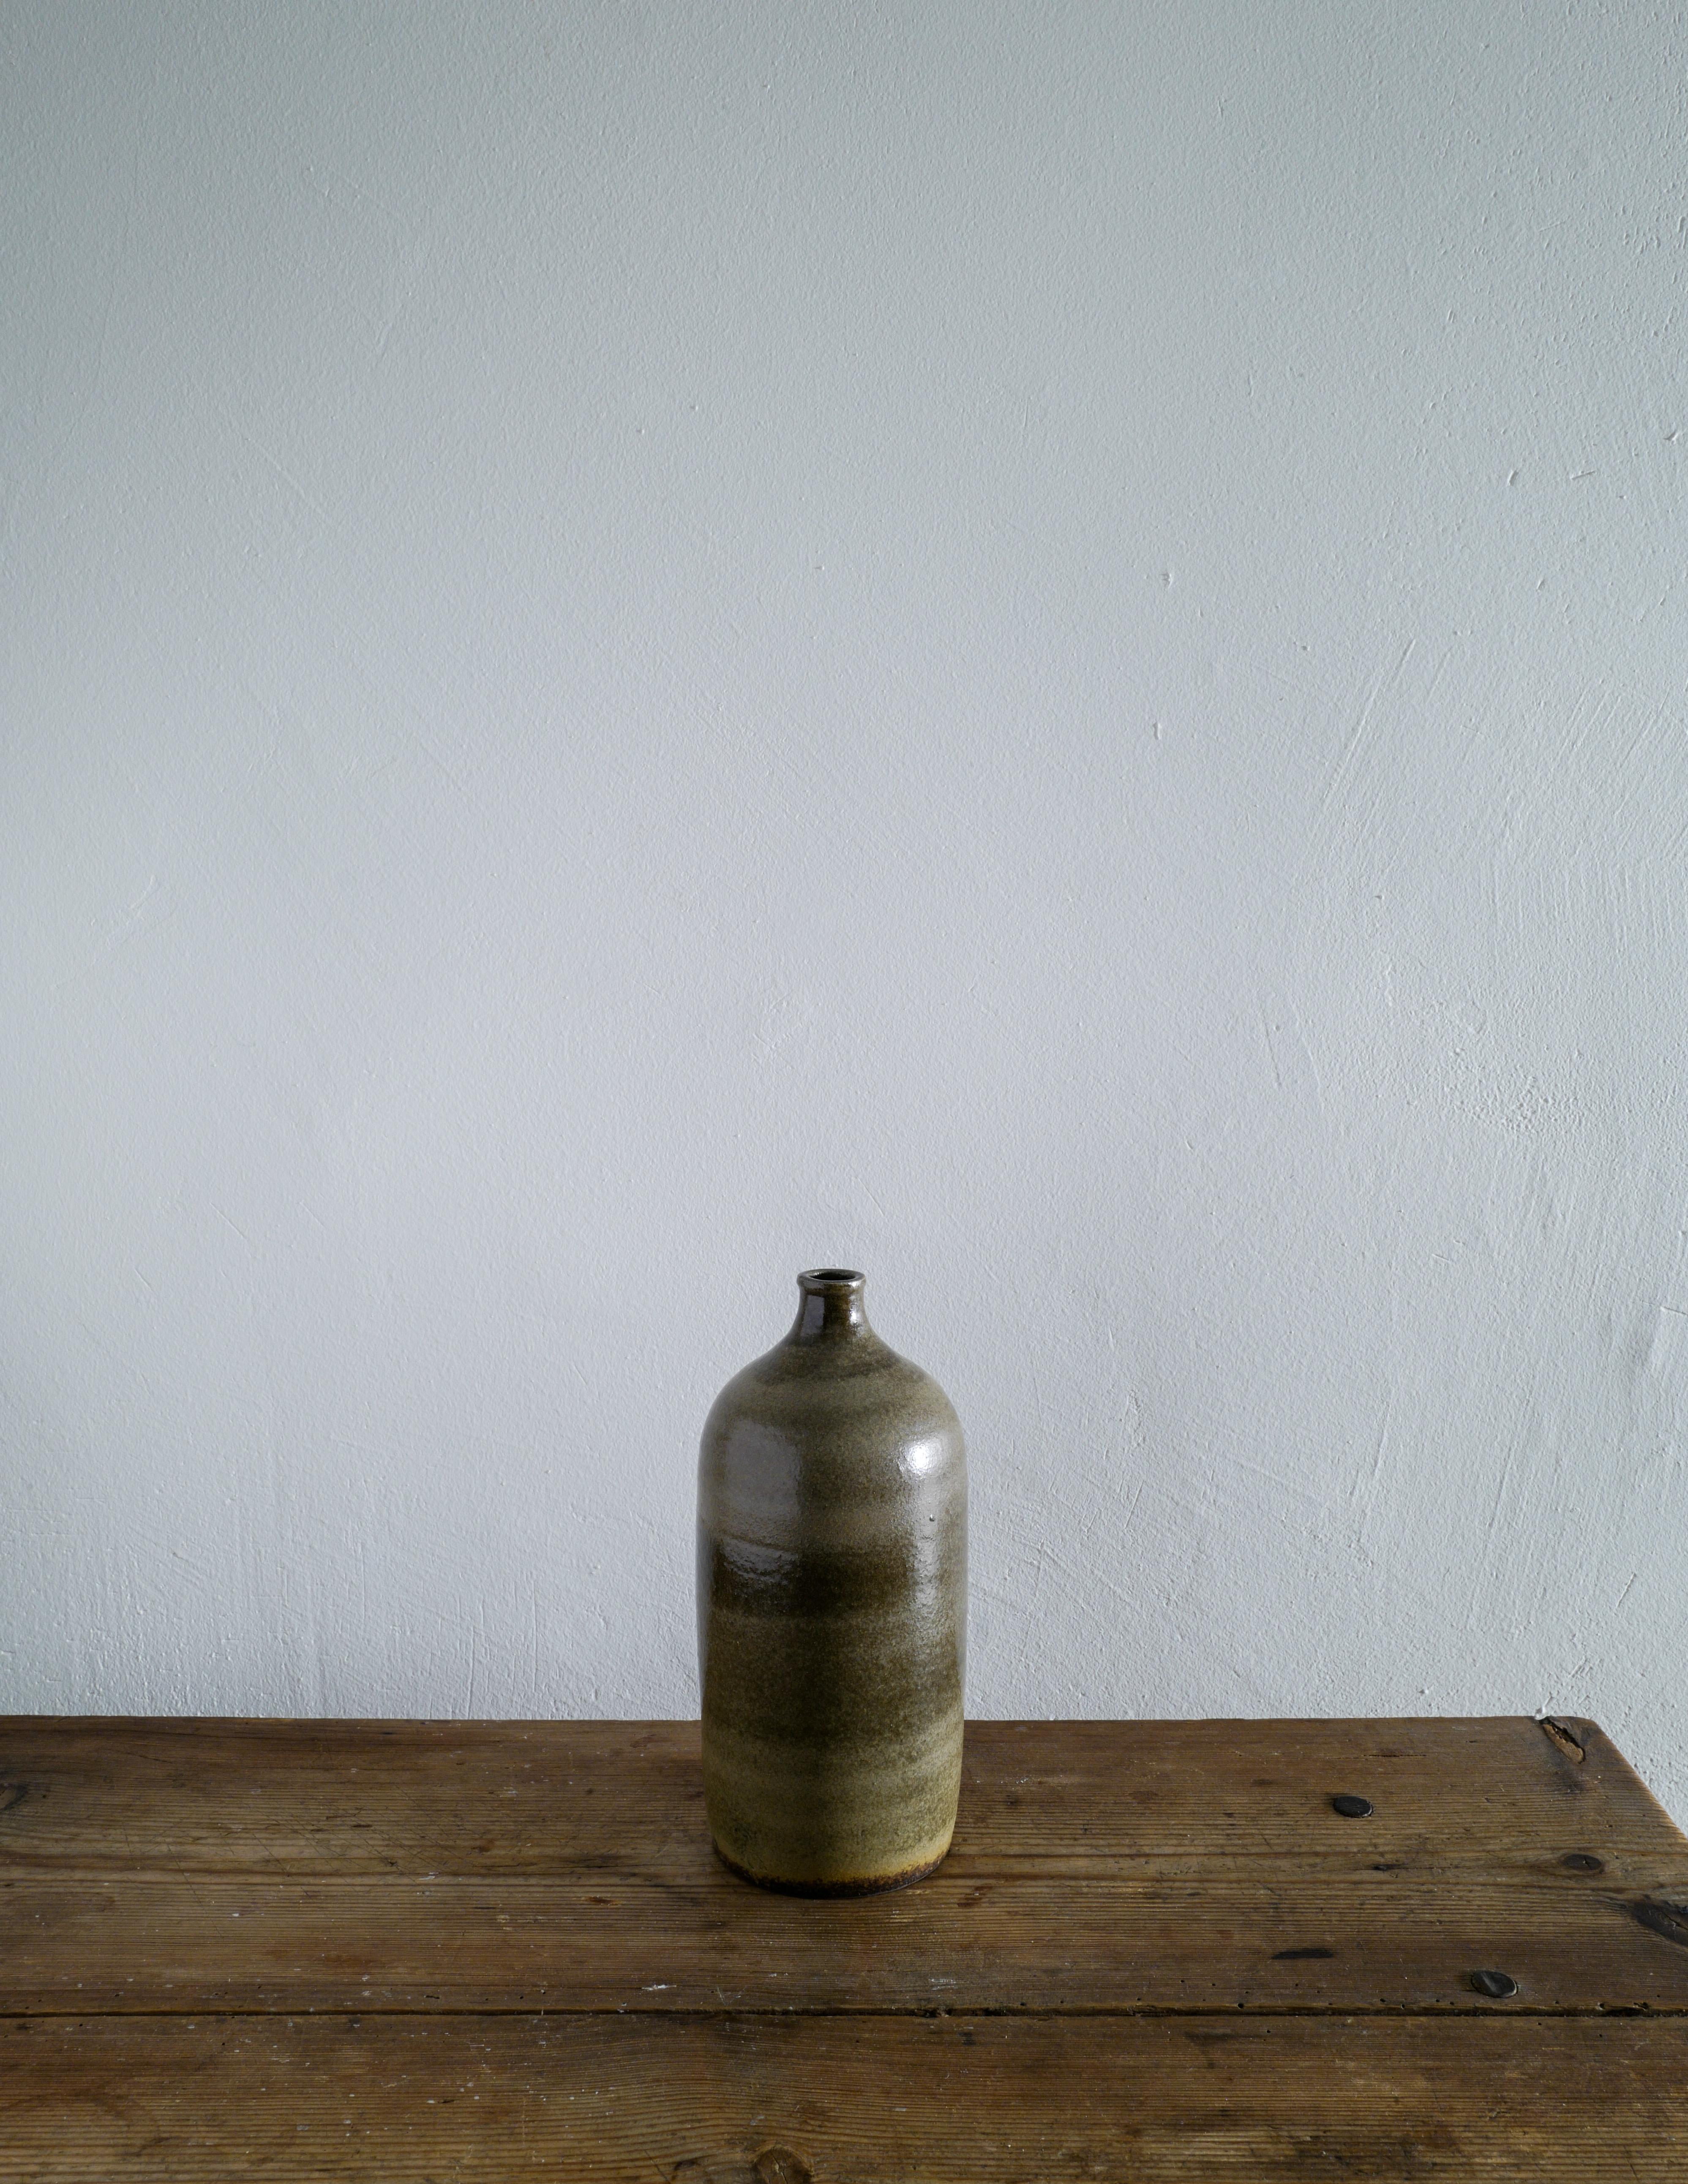 Rare ceramic bottle or vase in green glazed sandstone produced by unknown French designer in the 1950s. In good vintage condition with minimal signs from age and use. 

Dimensions: Height: 25 cm Diameter: 12 cm.